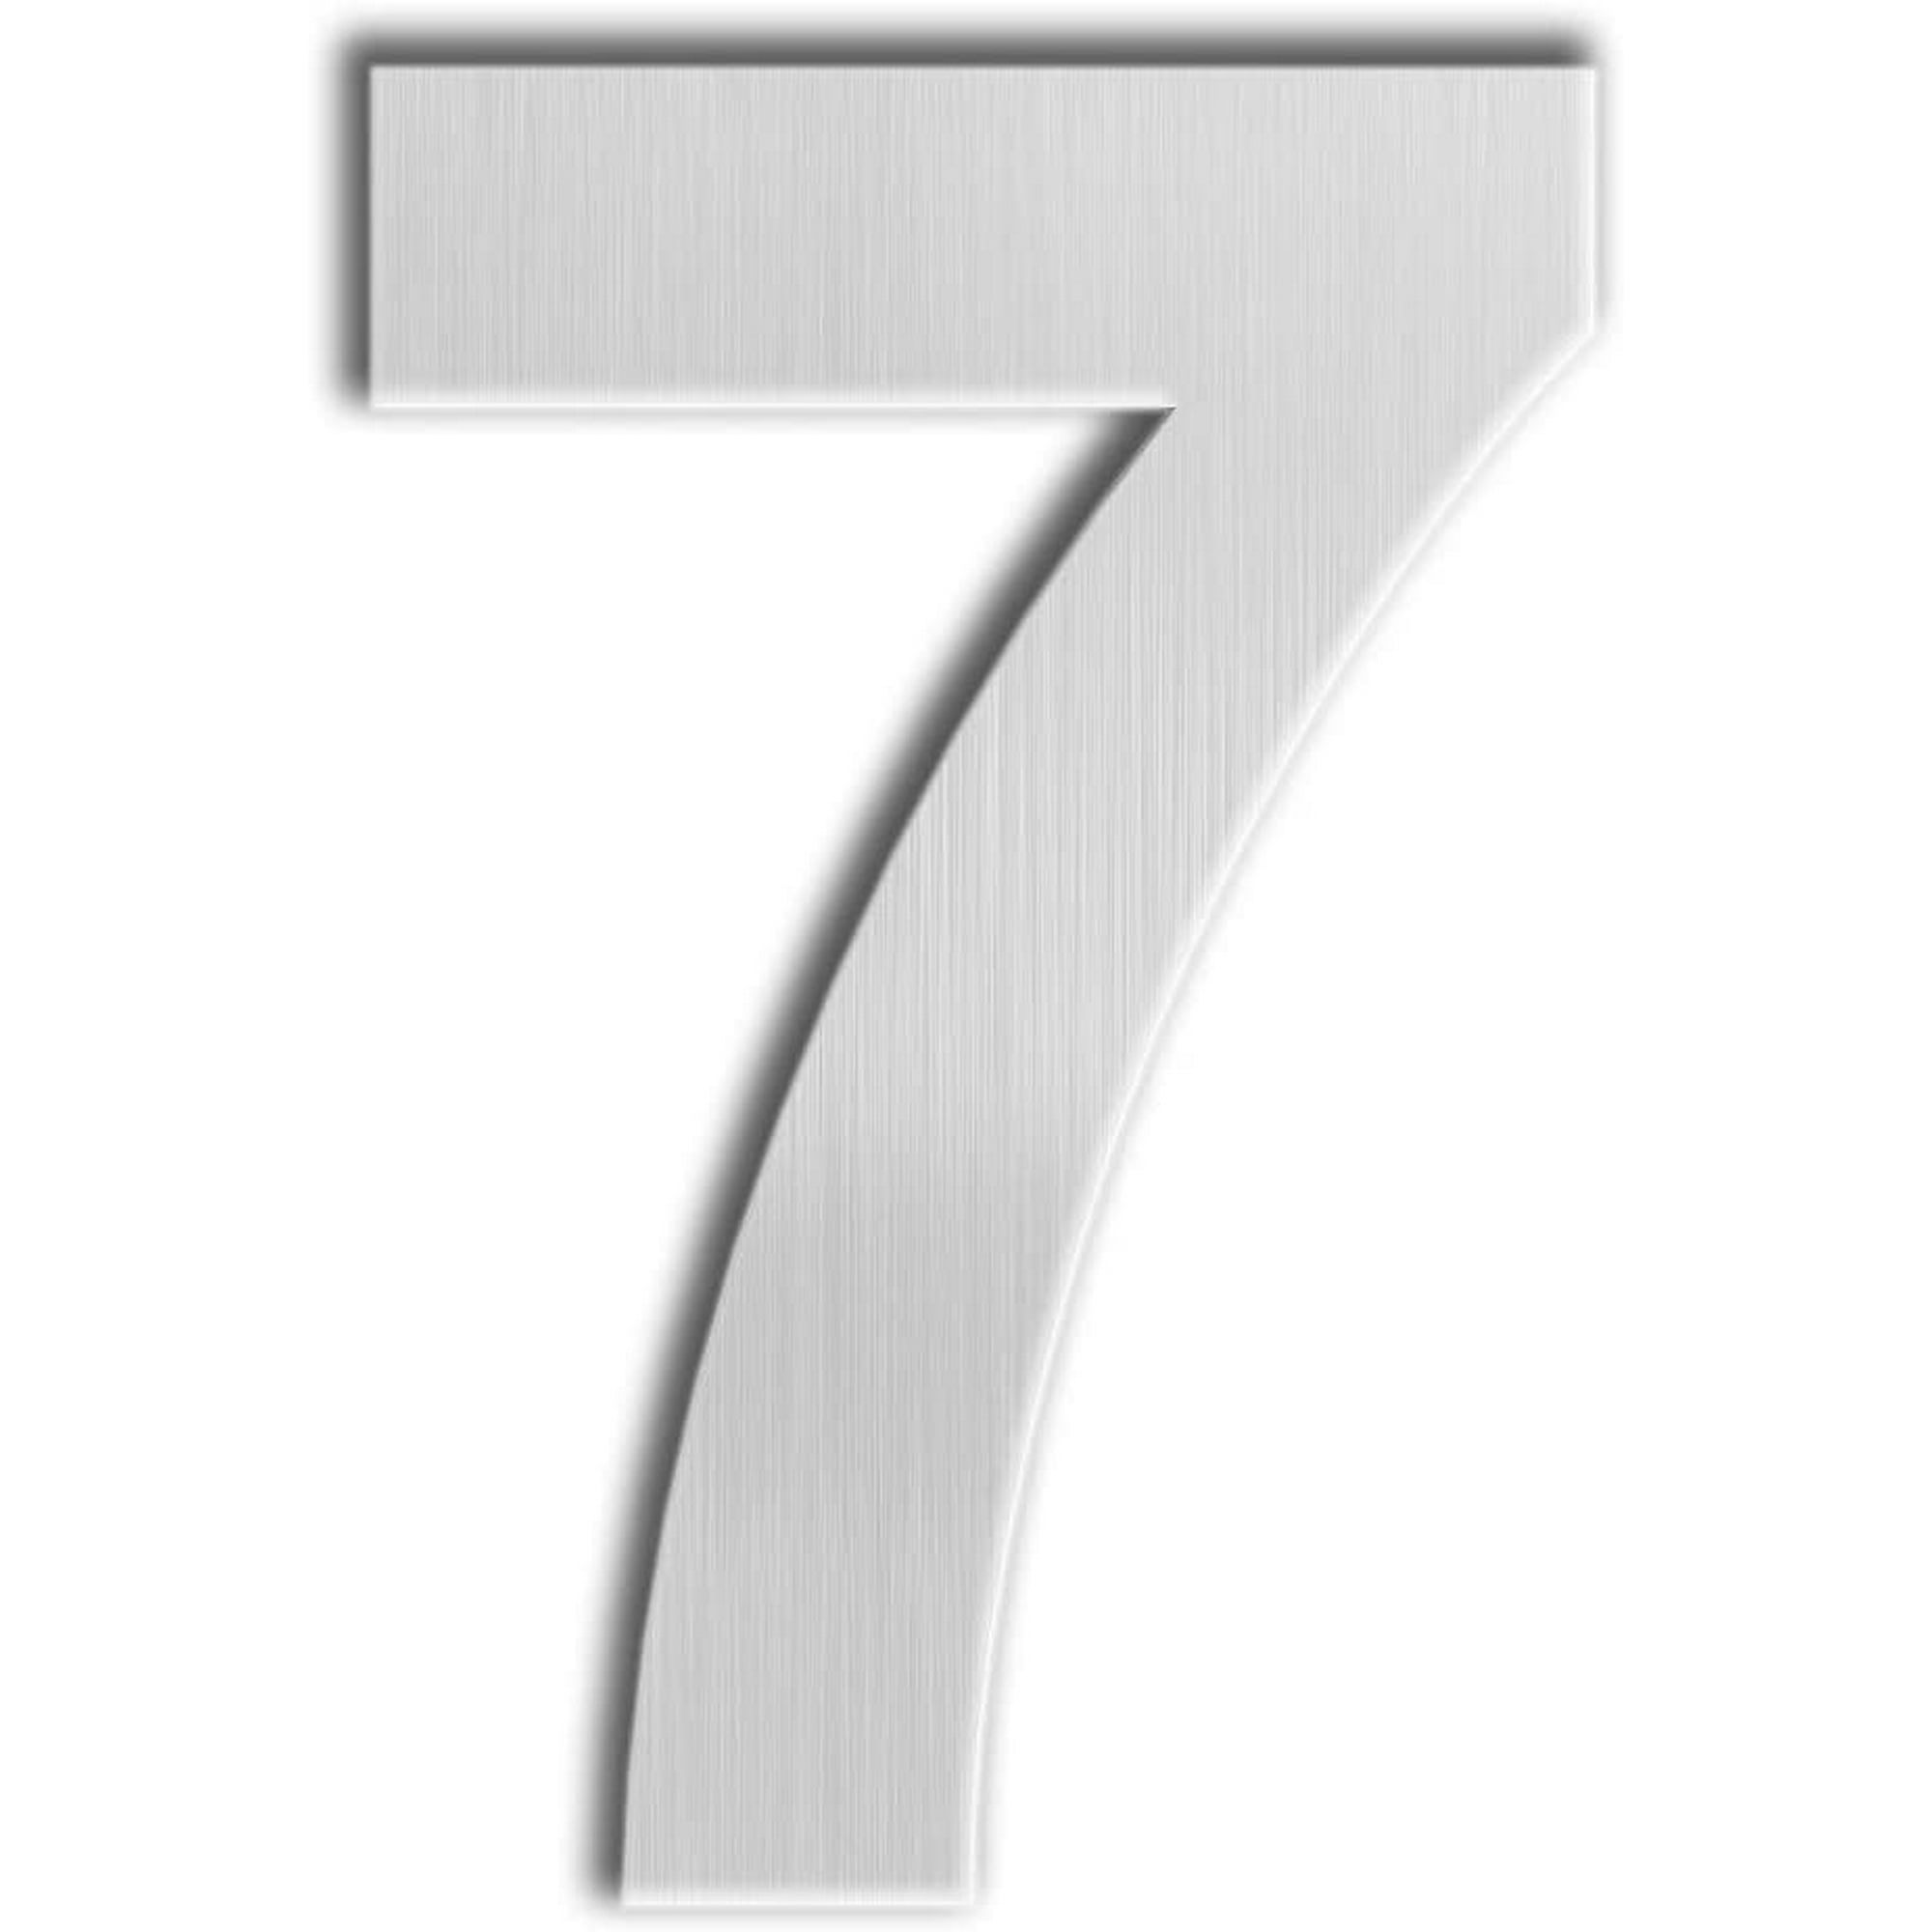 QT Modern House Number Brushed Stainless Steel SMALL 4 Inch Number 3 Three Floating Appearance Easy to install and made of solid 304 